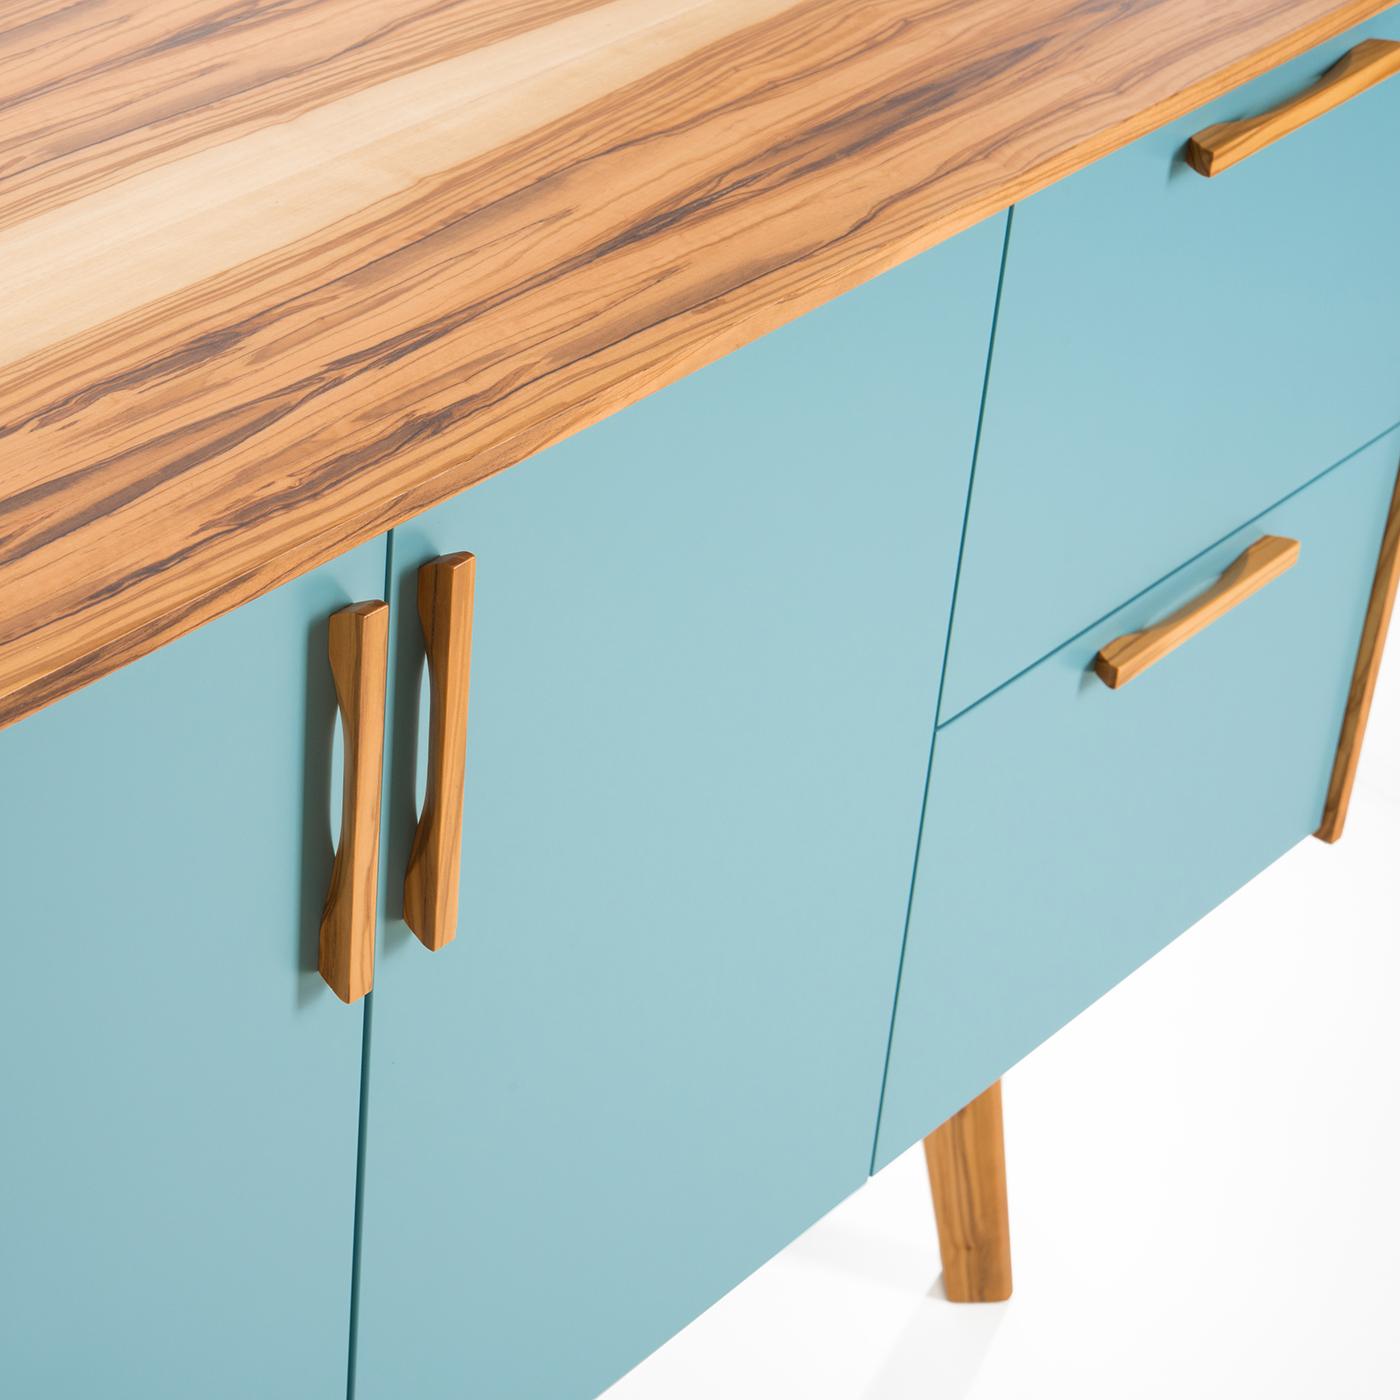 The Funny Sideboard centers around pure design wherein form follows function without compromising style. Impeccably handcrafted, the top features three storage compartments (two with doors and a two-drawer unit) with flush-style veneered panels in